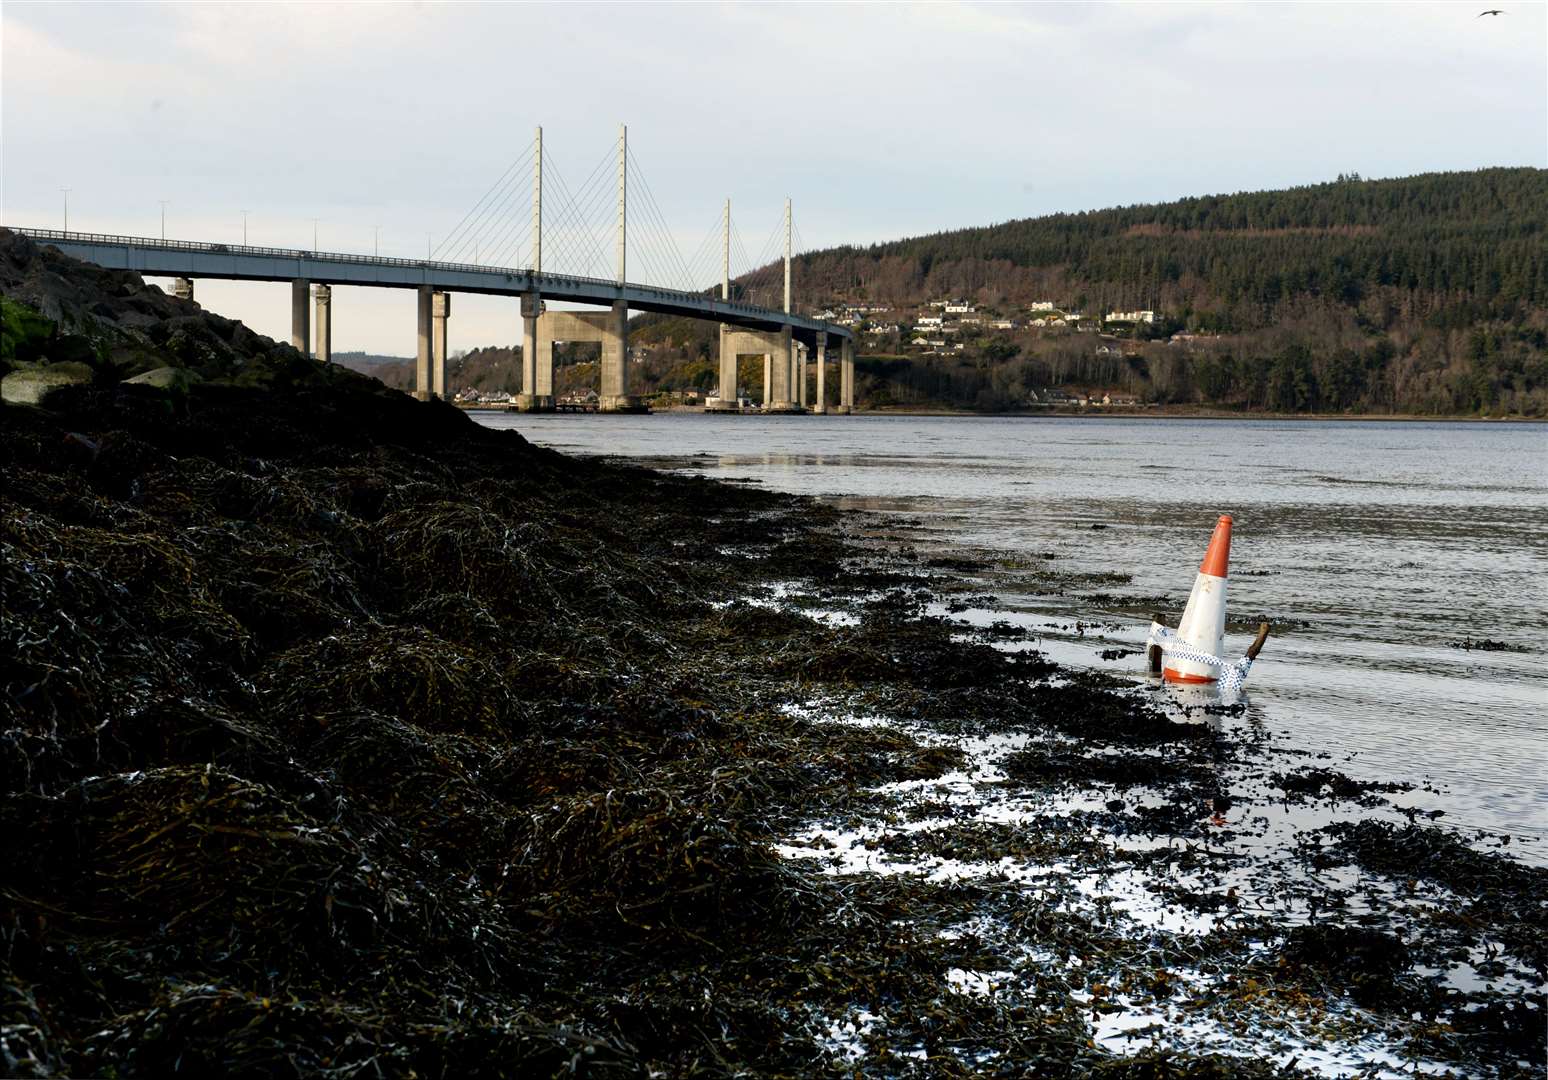 A cone, left by the coastguard, marks the spot where the suspected device was discovered yesterday around 100m from the Kessock Bridge.